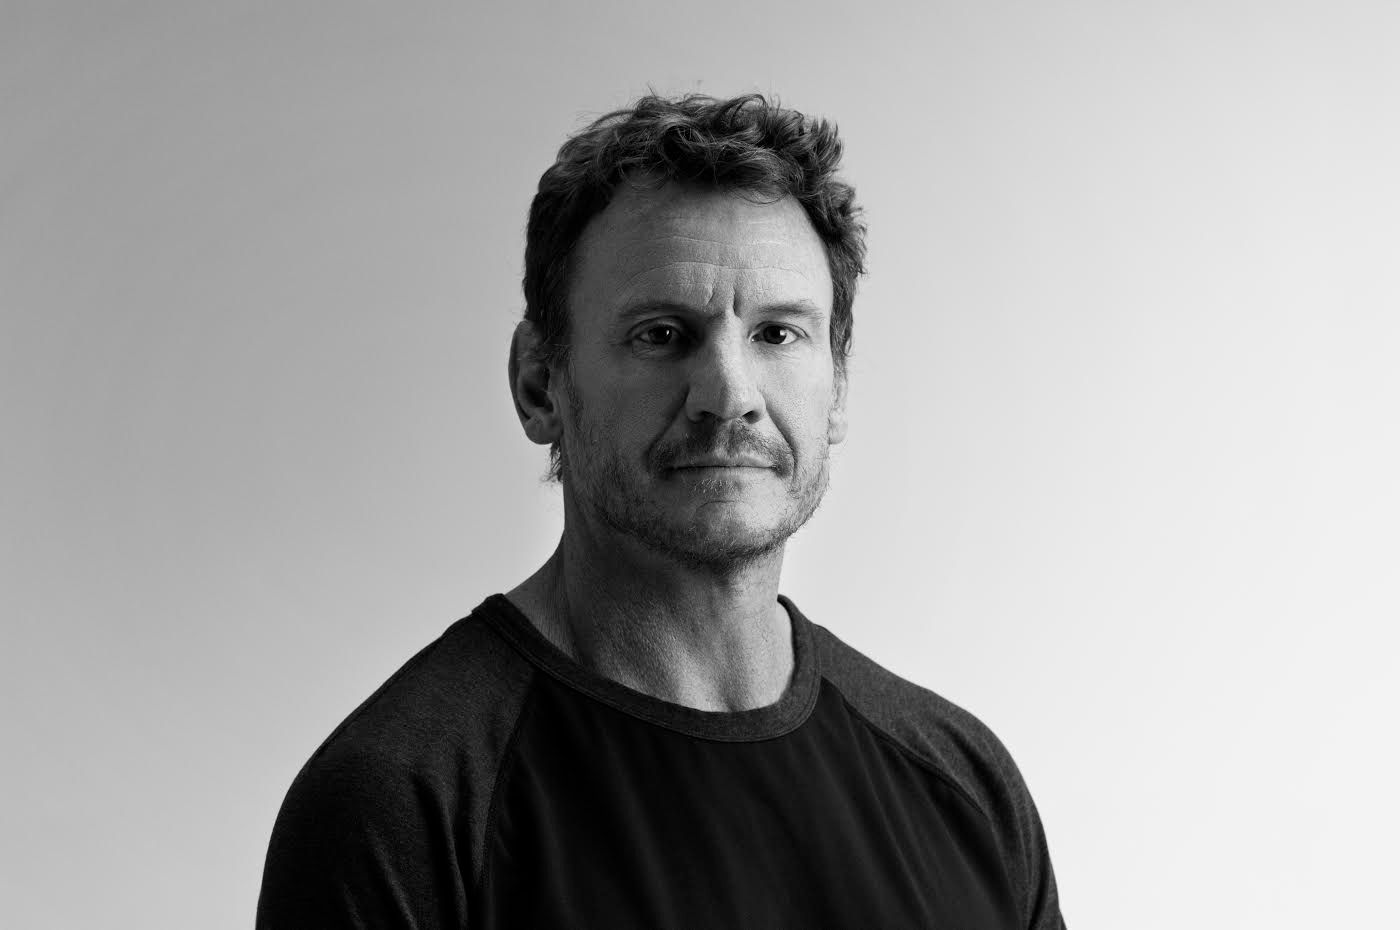 R/GA's Nick Law to Chair 2017 AICP Next Awards Judging Panel